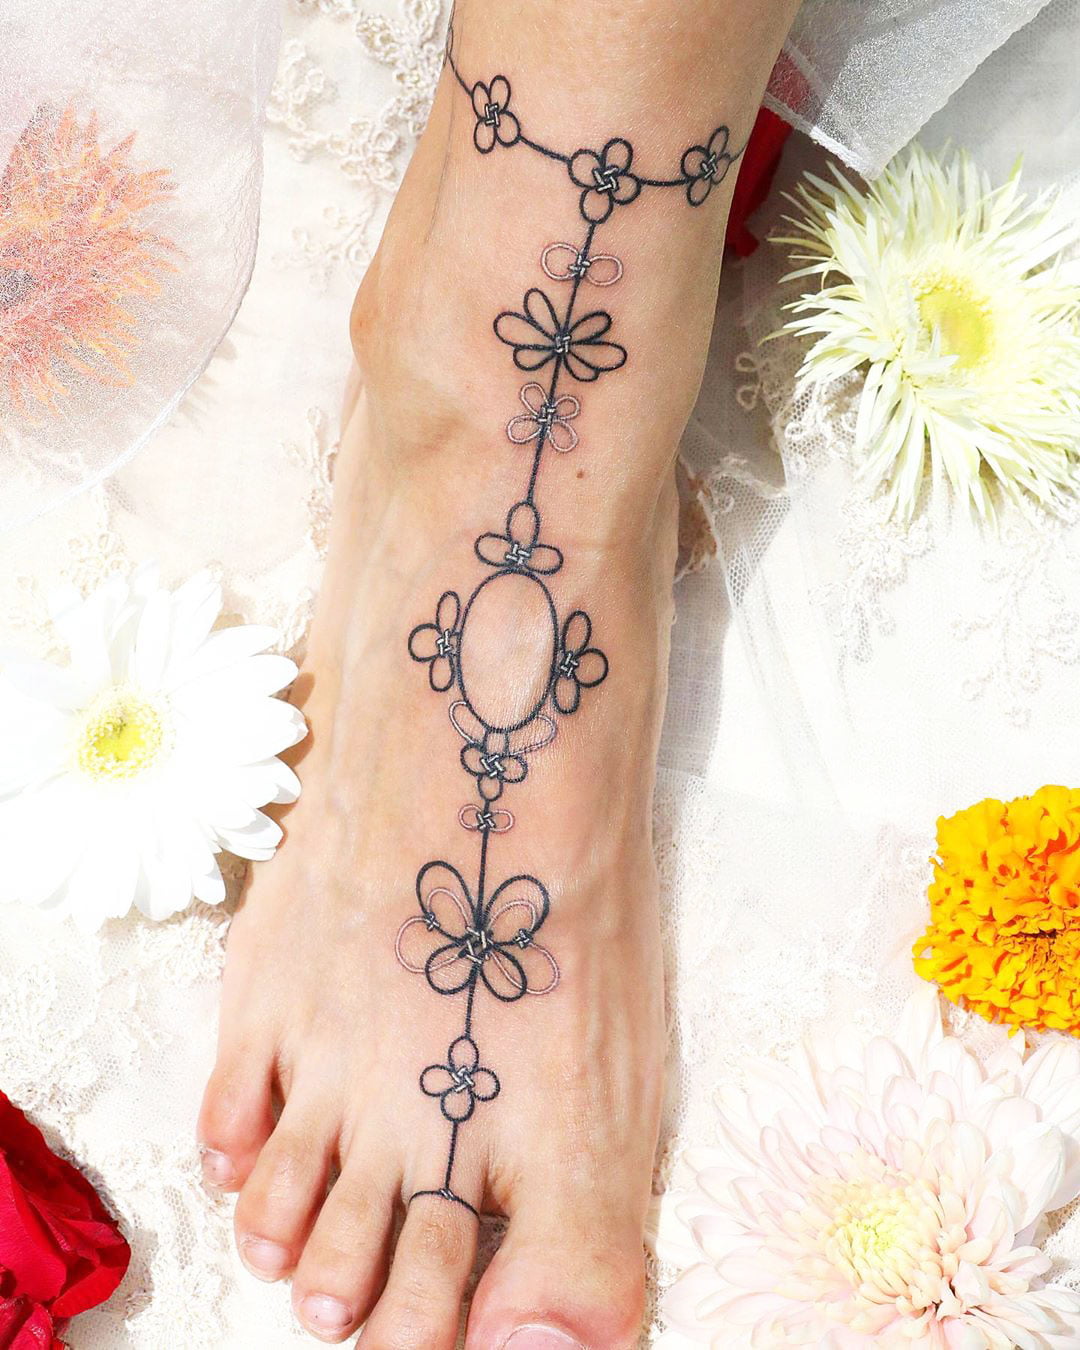 Meaningful Ankle Tattoos